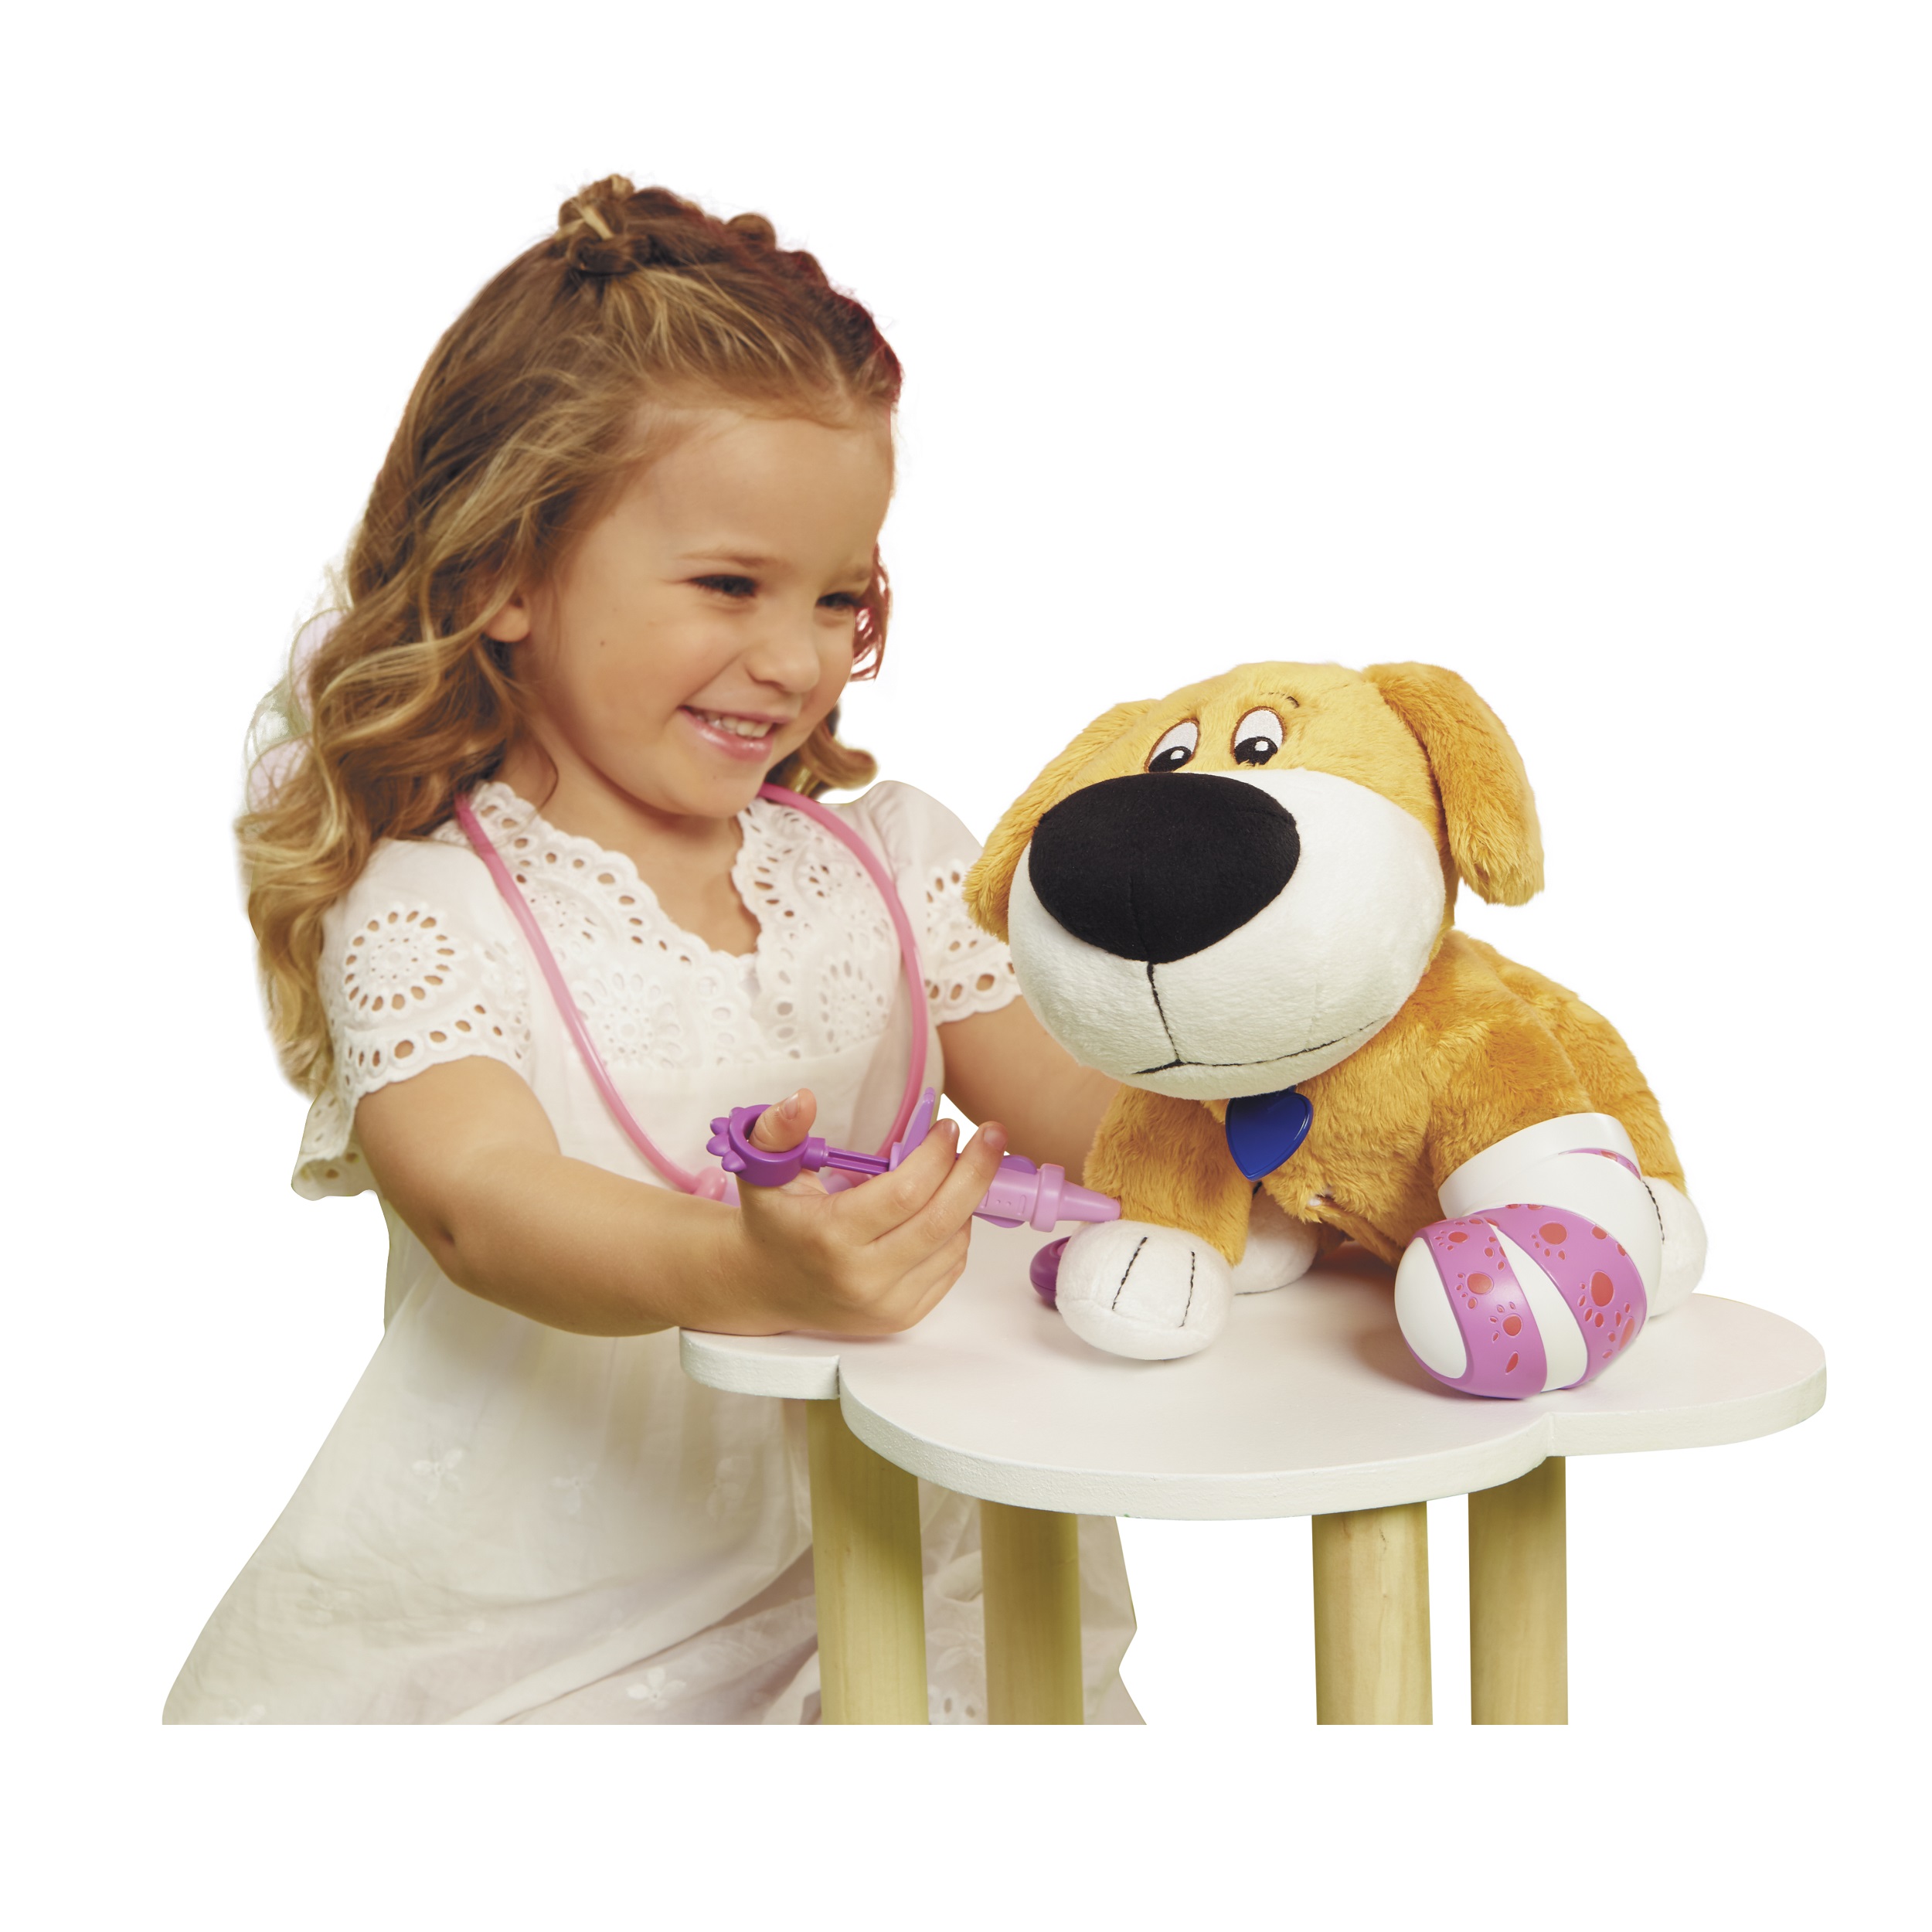 Little Tikes Make Me Better Mitts Plush Interactive Pet $9.45 + Free Shipping w/ Walmart+ or Orders $35+